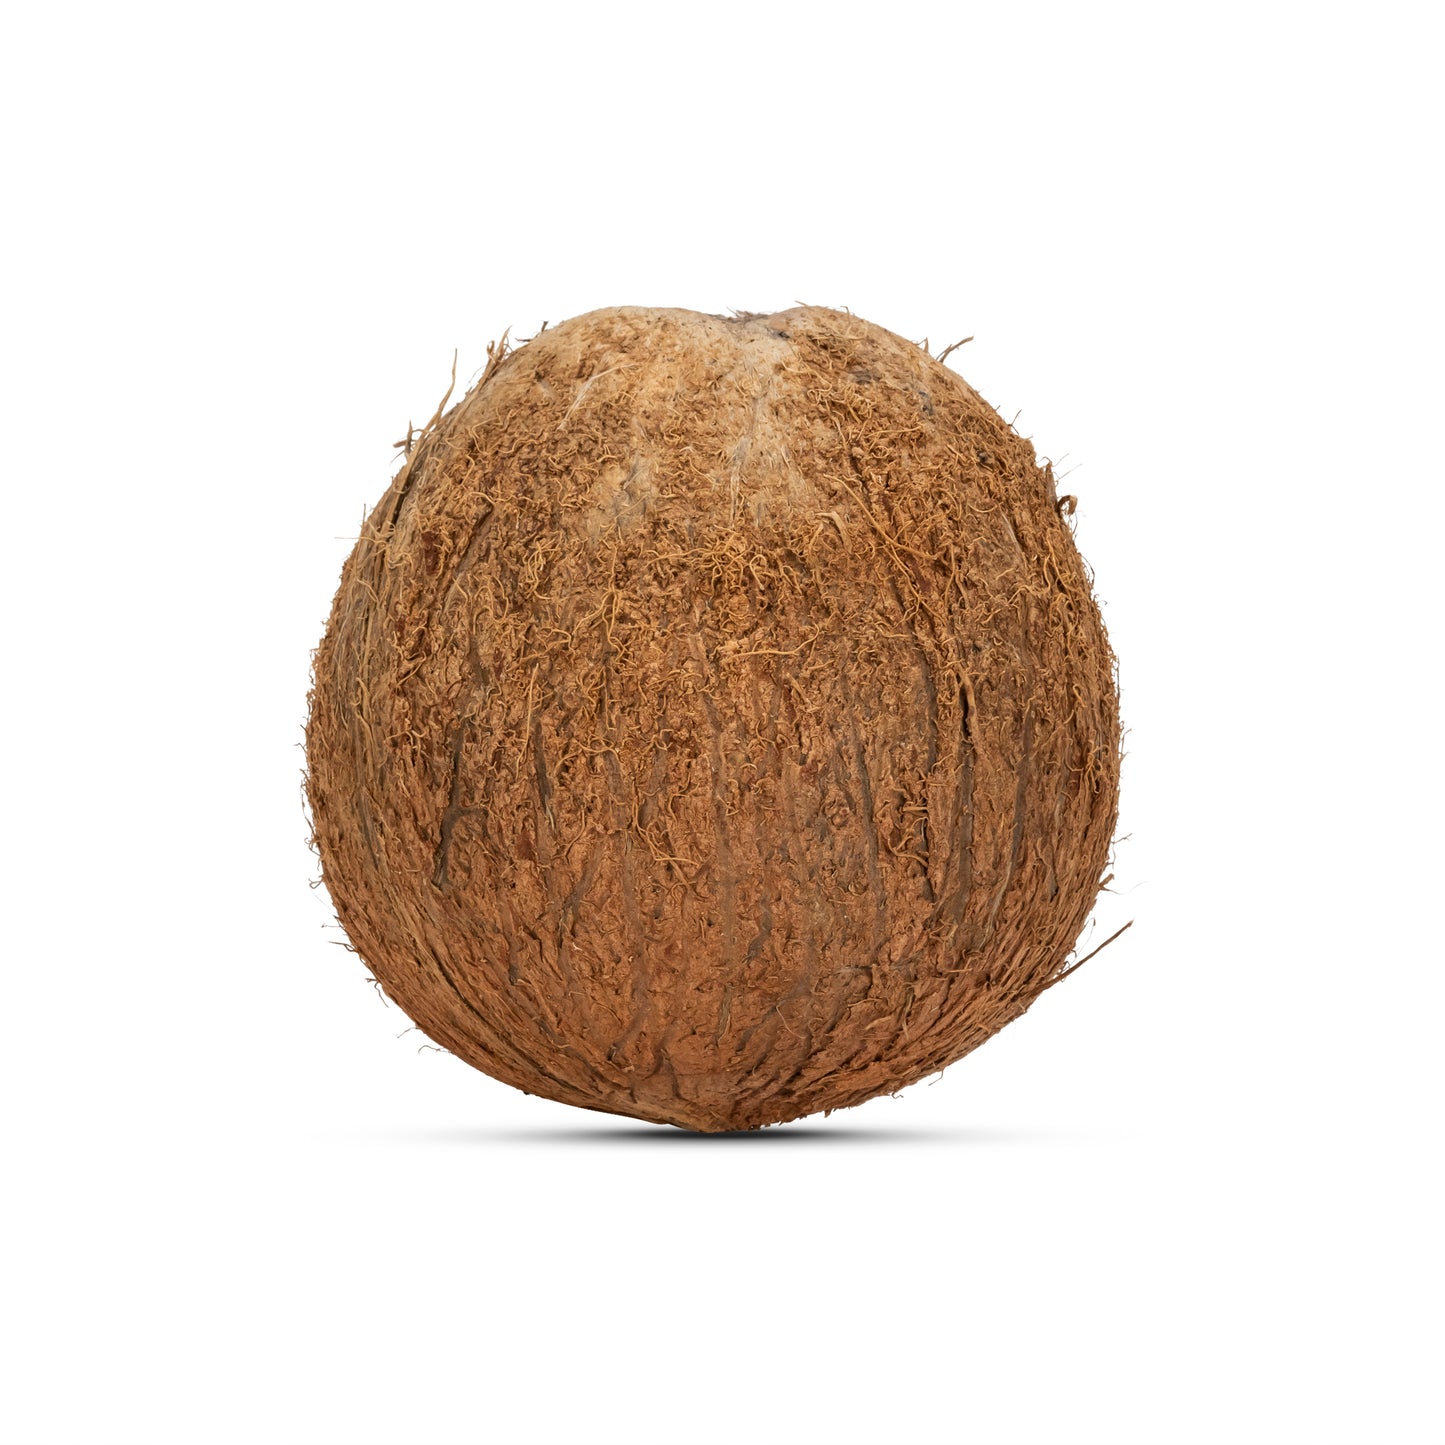 hollowed out coconut shell with fiber